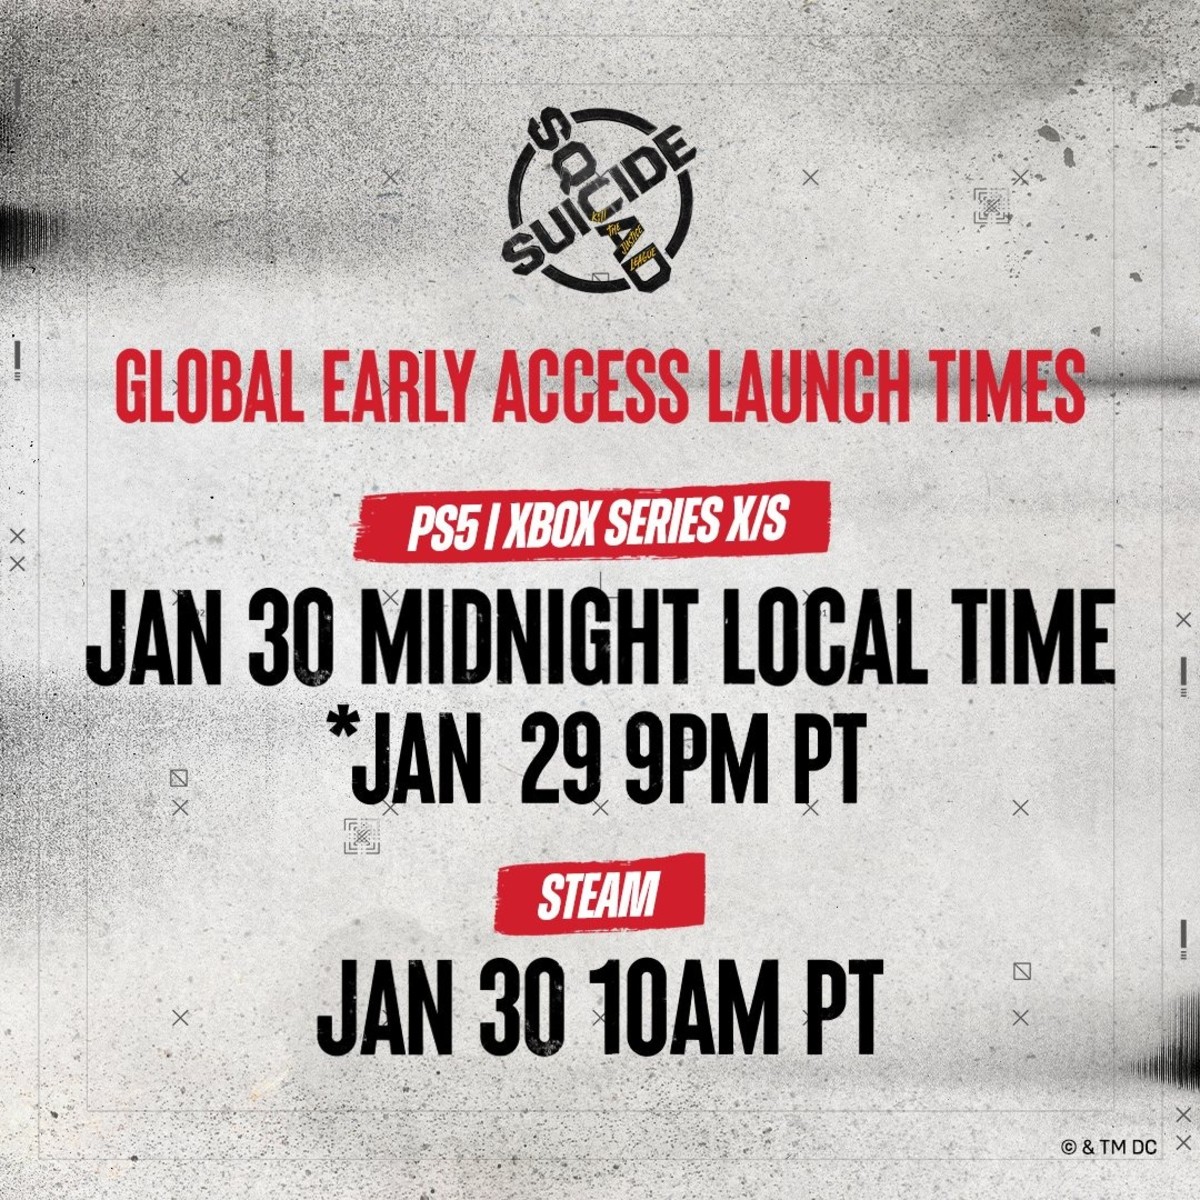 Early Access launch times.